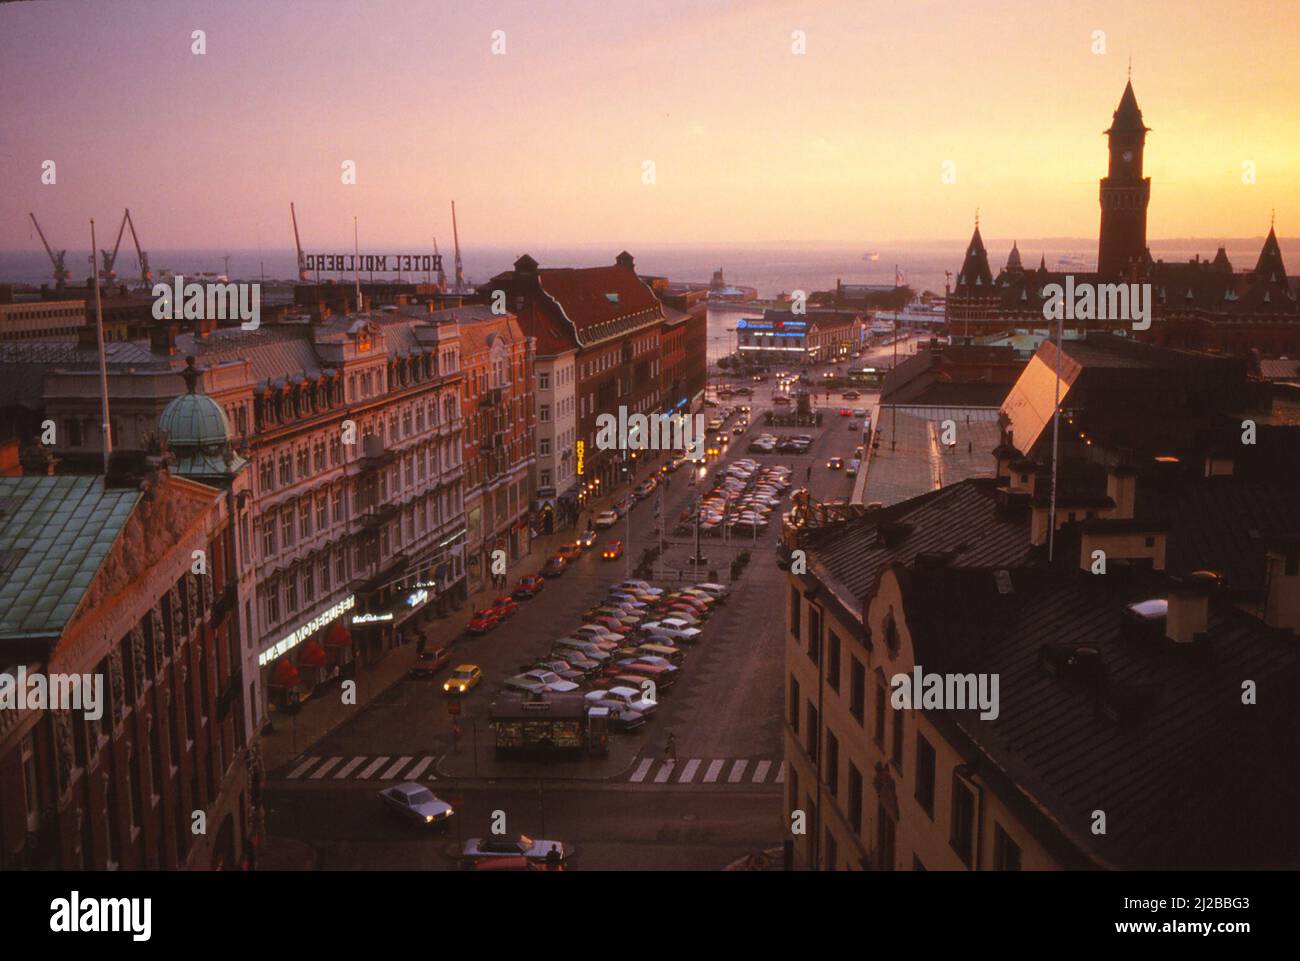 From Terrasstrapporna (Terrace Stairs) looking down to Stortorget, the harbour and the Øresund Strait, Helsingborg, Scania, Sweden, Sept/Oct 1979 Stock Photo